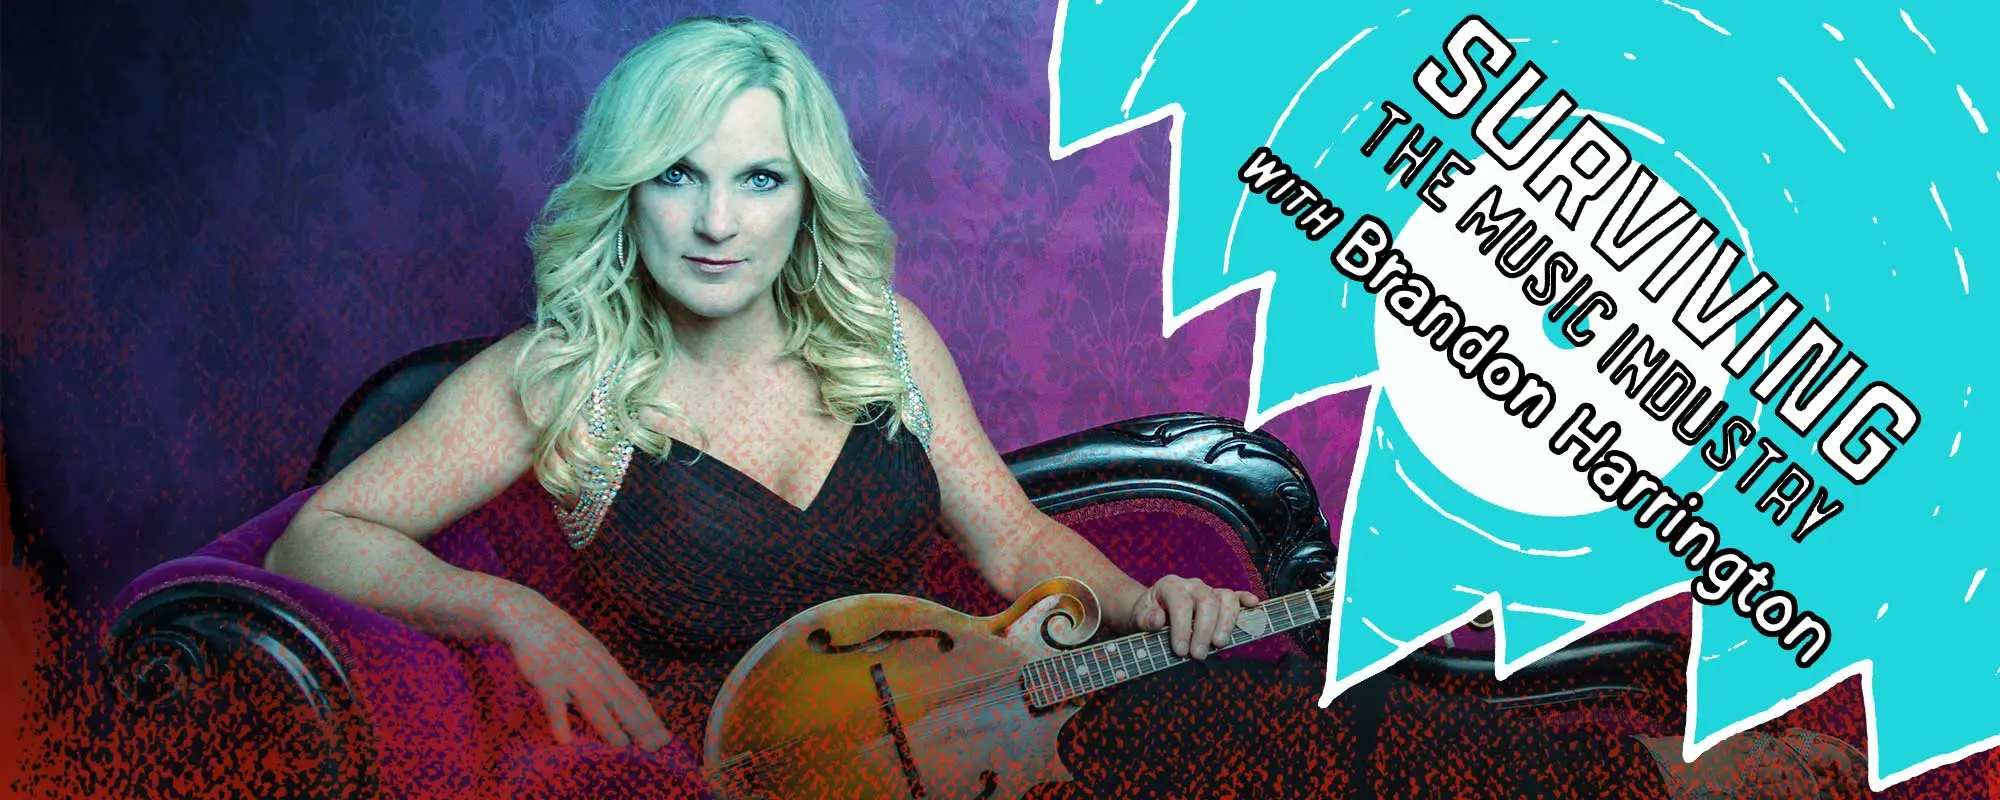 Rhonda Vincent Reflects on Pivotal Moments From Her Career Ahead of Her Upcoming Release ‘Music Is What I See’ on Surviving the Music Industry